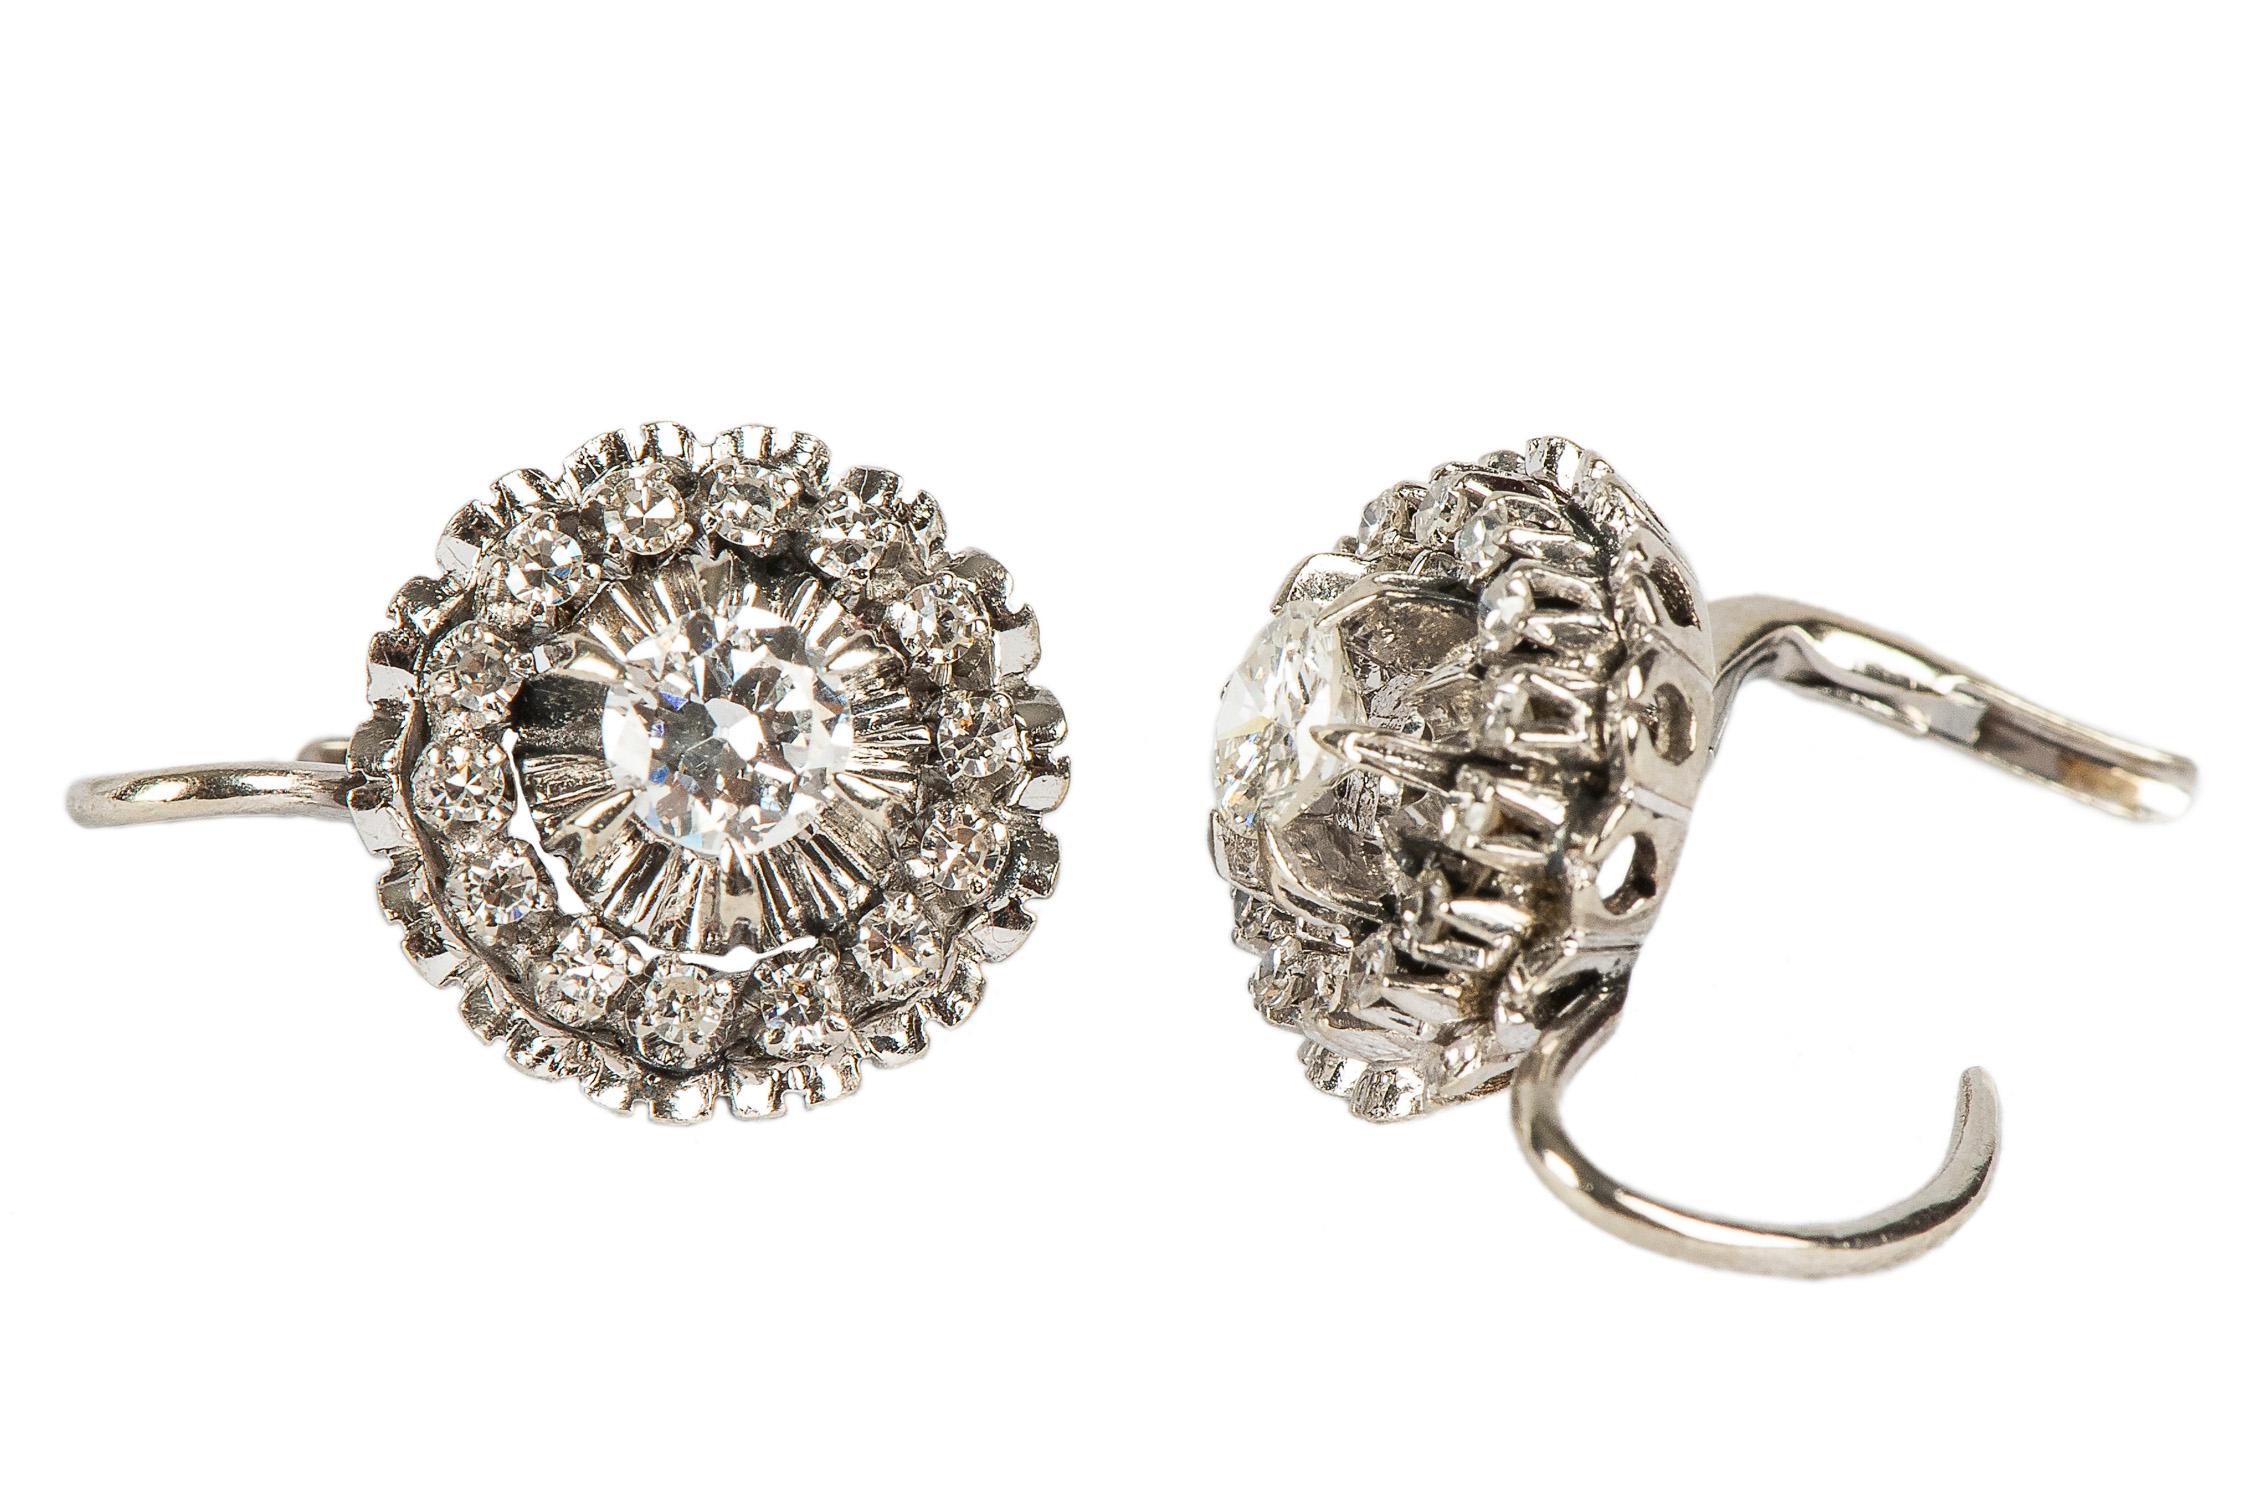 Fashioned as 18k white gold pendant earrings of stepped floral design set with two central brilliant-cut diamonds weighing approximately .76 carat total, surrounded by 28 small diamonds in a prong mounting within a crenelated outer border of white